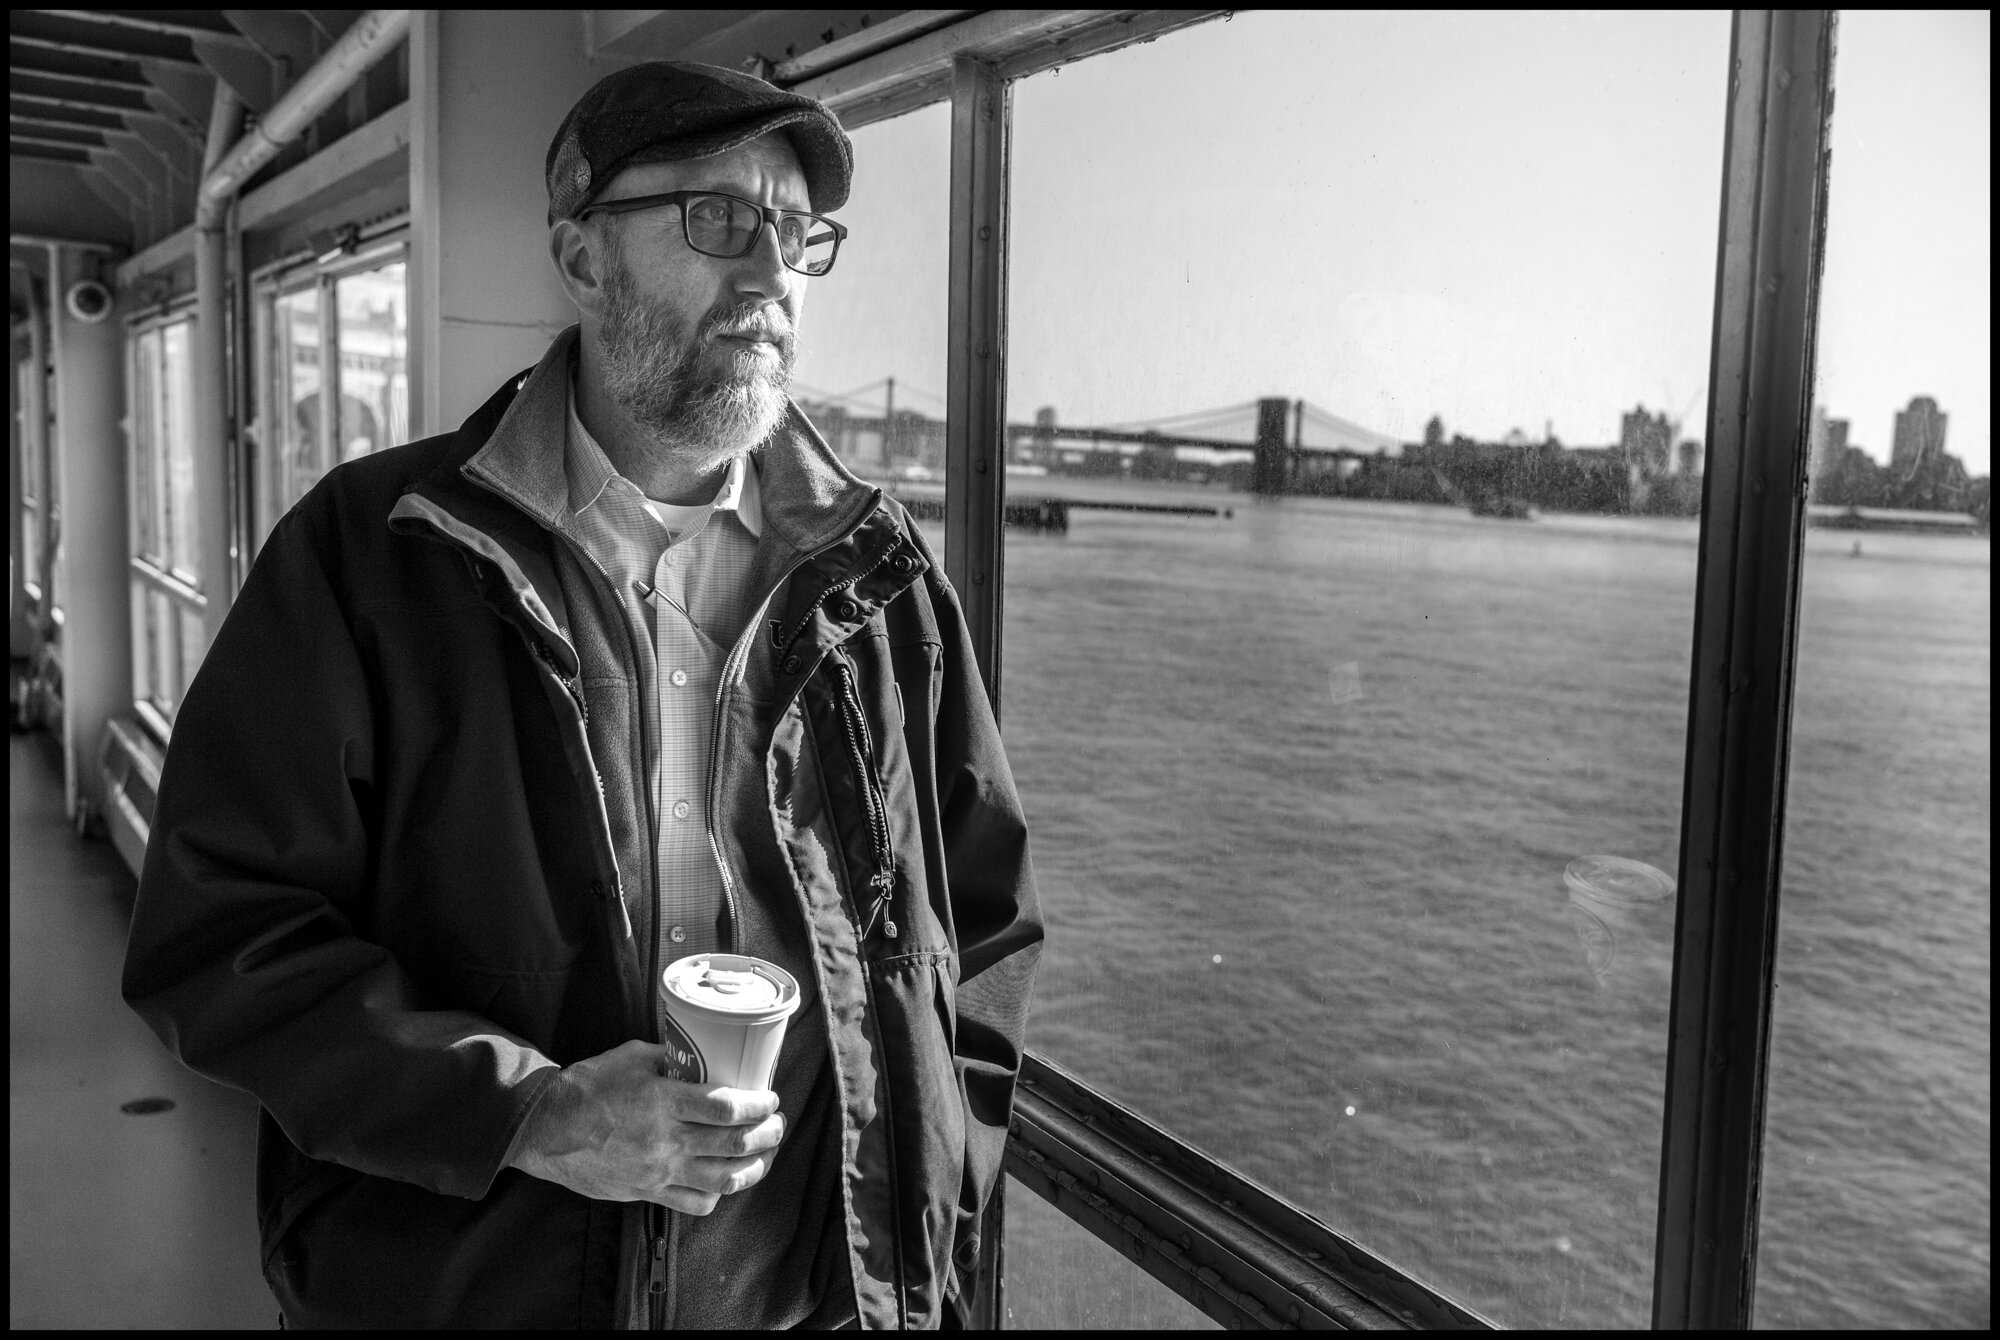  Jimmy Callahan lives on Staten Island and comes into the city each day on the ferry. He works for the Local 28 Sheet Metal workers Union-he told me, “my wife wants me to stay home, but my guys are out there still working, so I need to be there for t